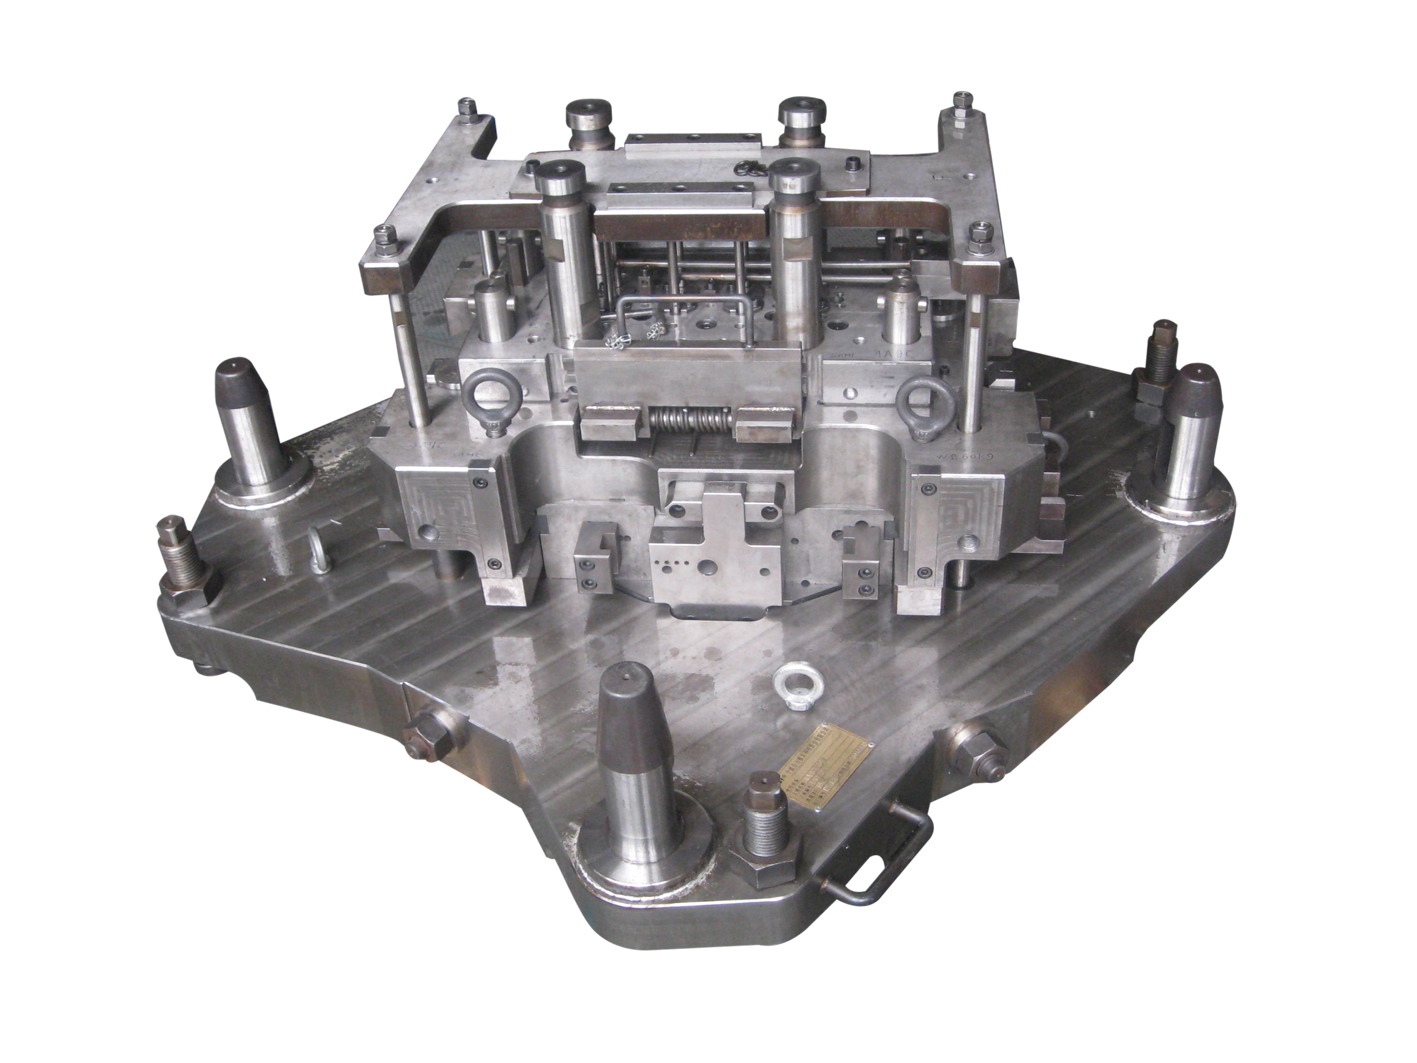 Casting mould structure and working principle